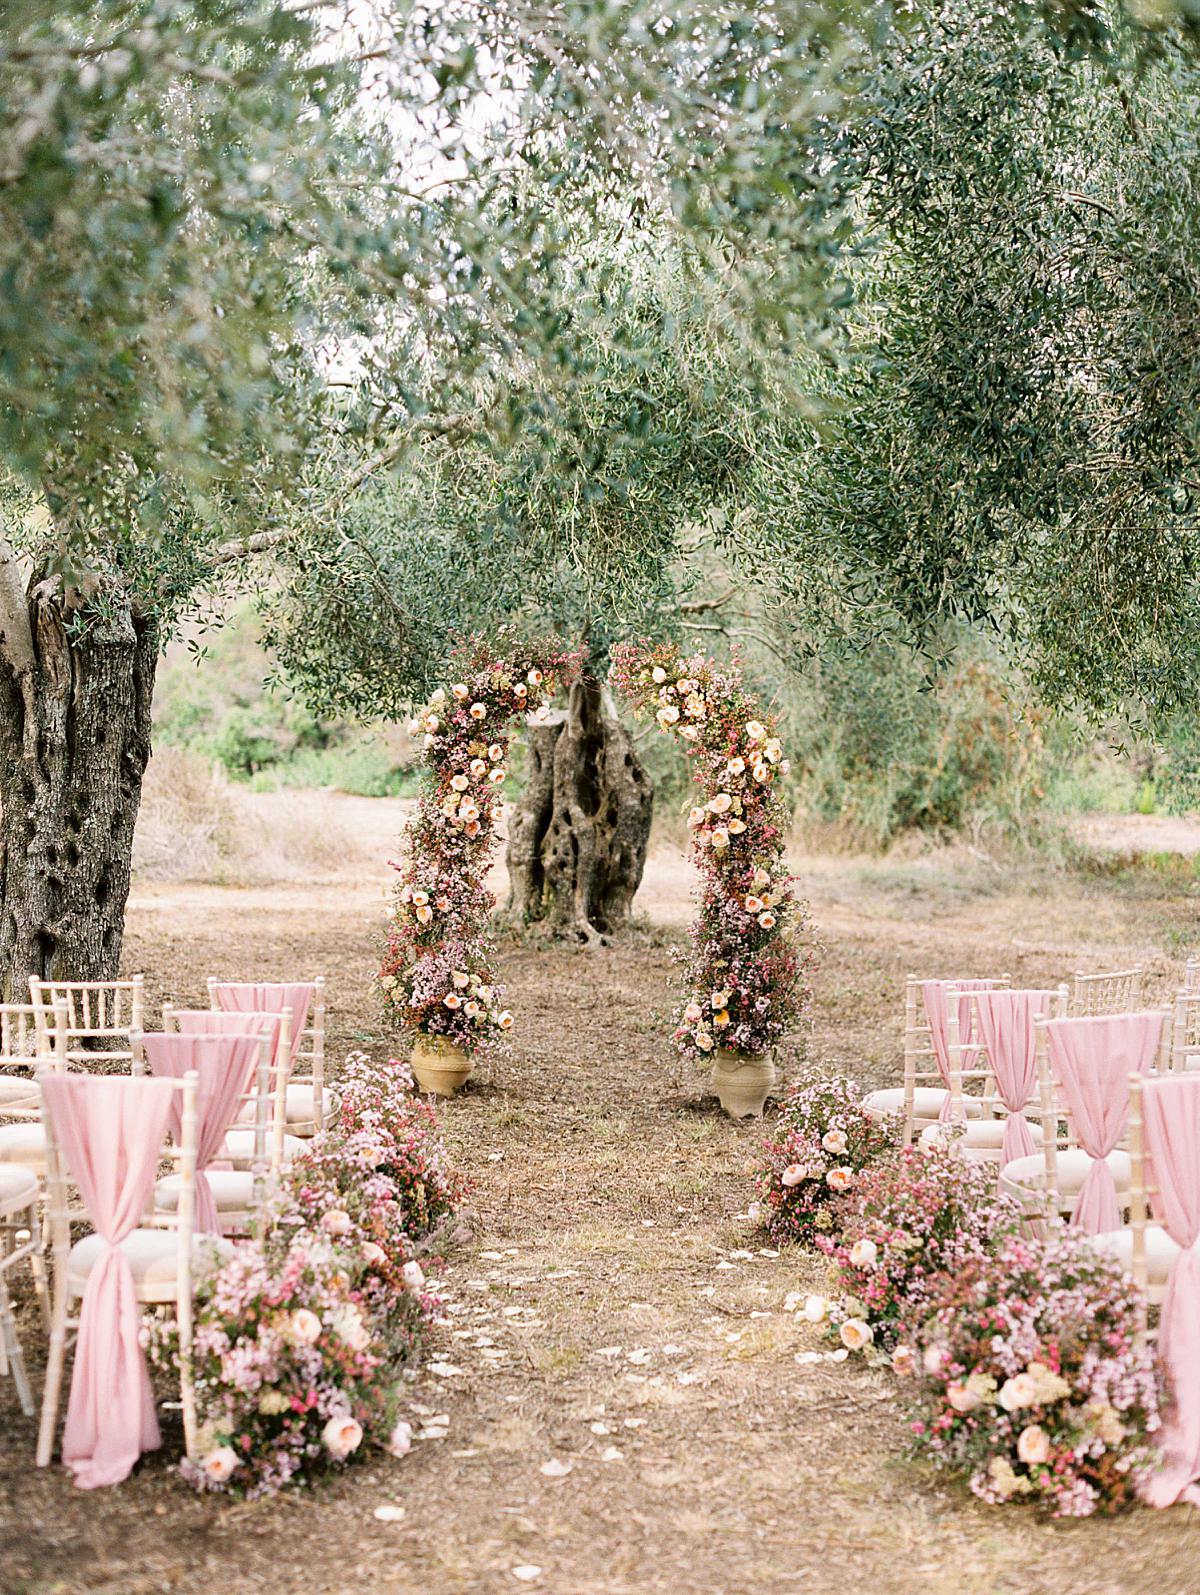 ceremony set up in an olive garden